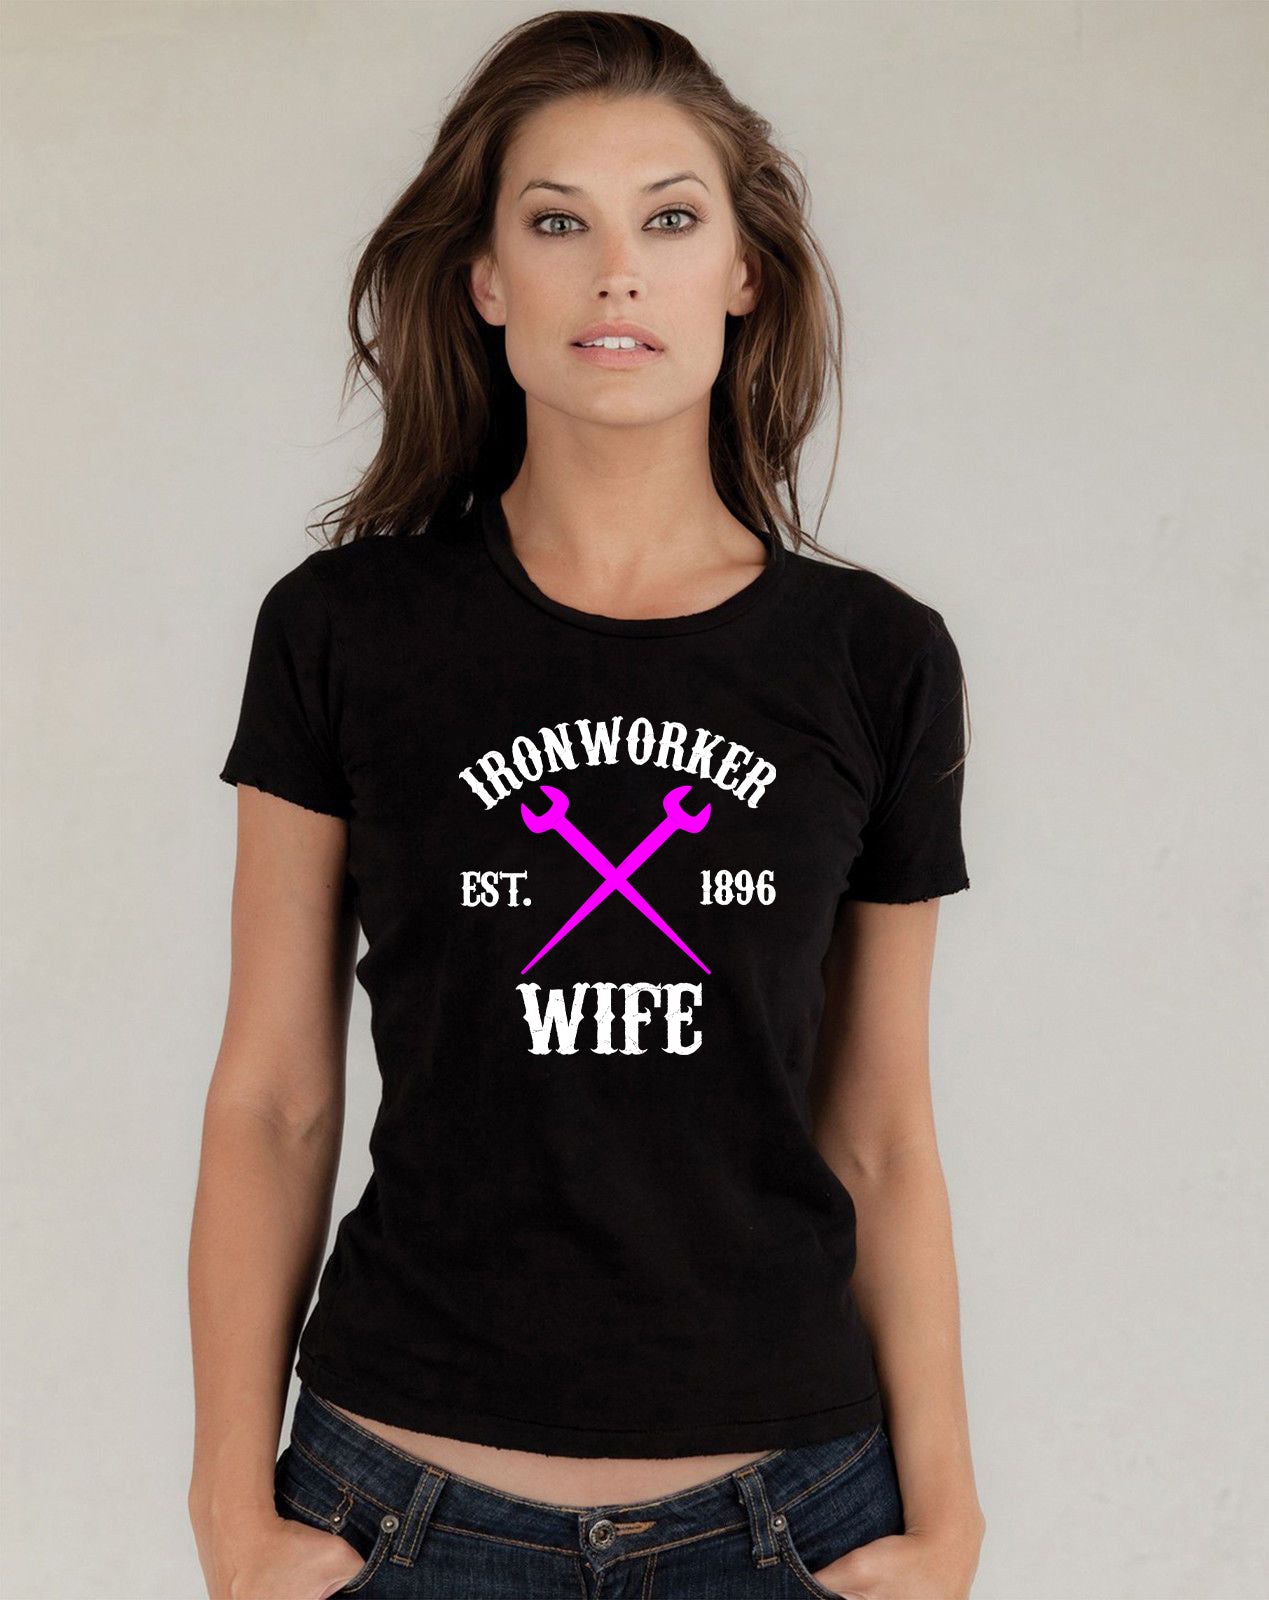 Ironworker Wife - Pink Spuds - Black Short Sleeve (Women's Fitted T-Shirt)